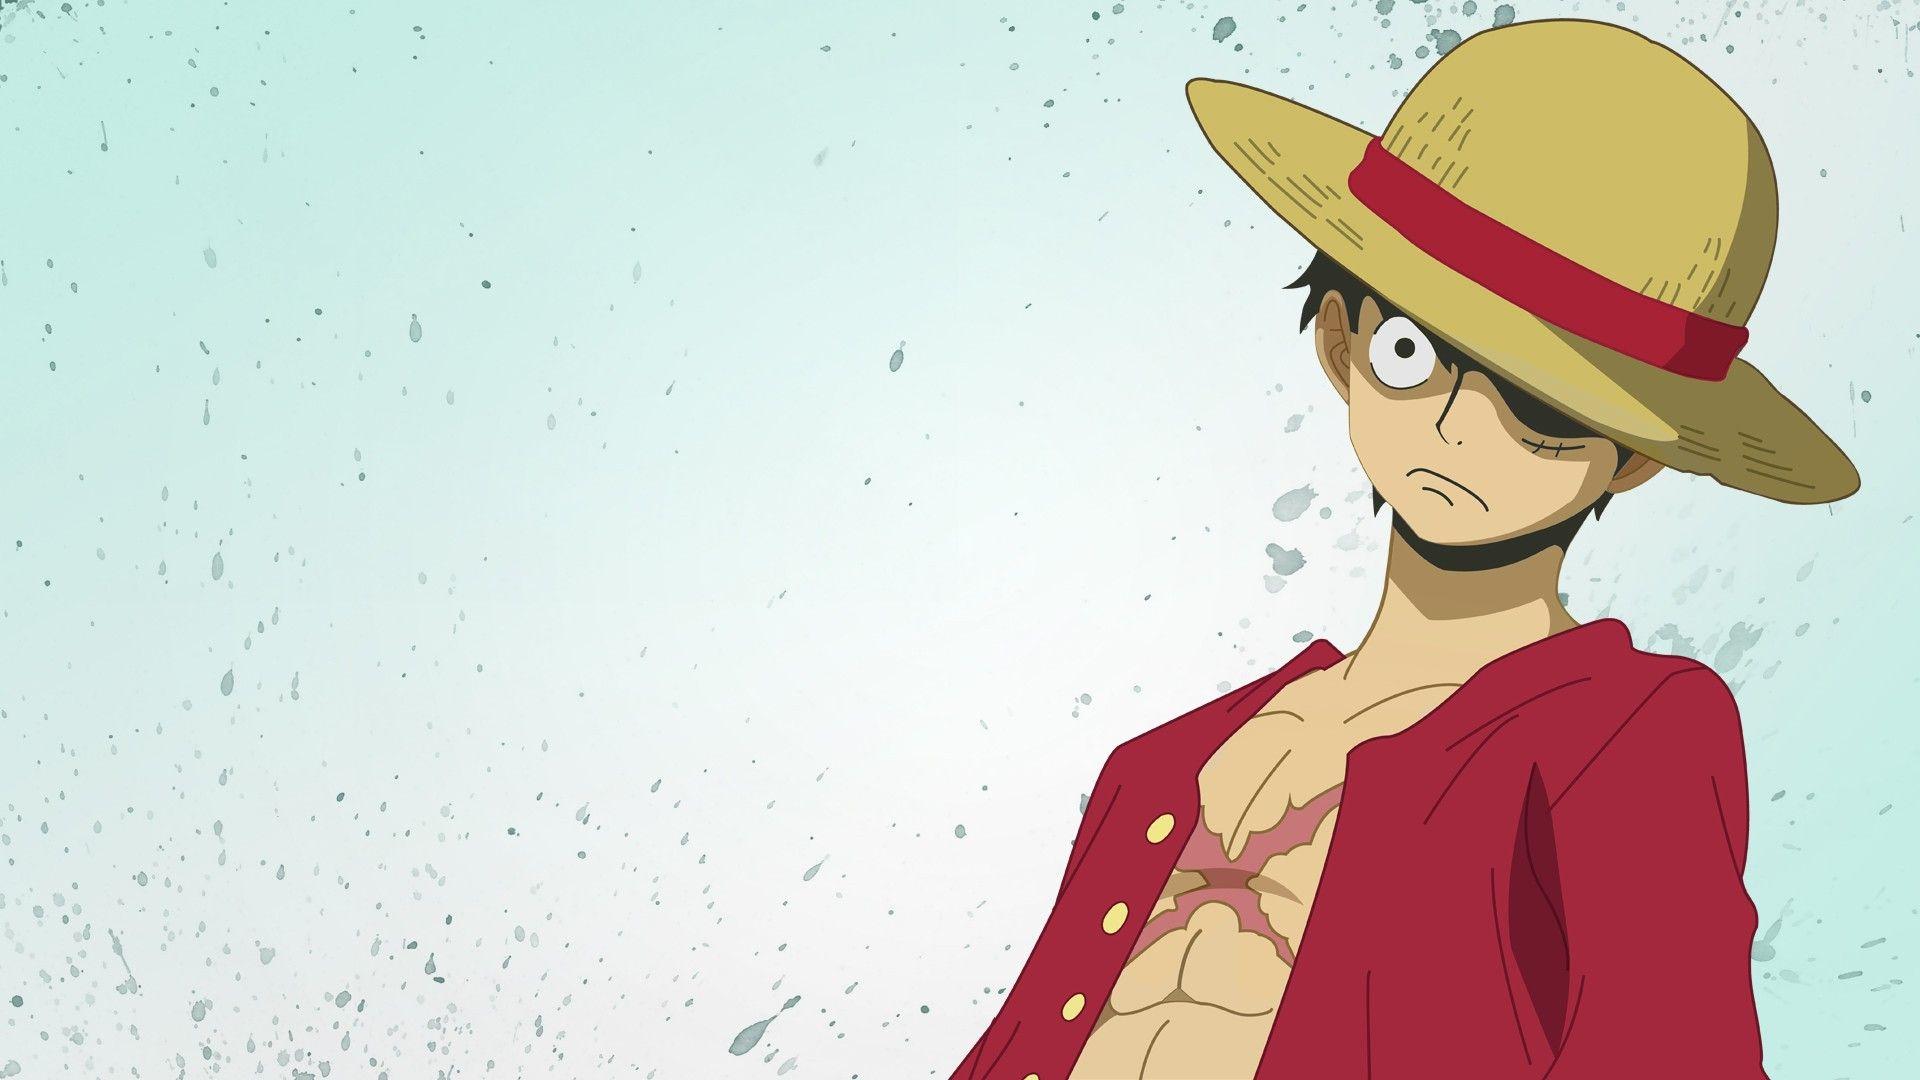 New One Piece Luffy Anime Wallpaper HD for Desktop Background